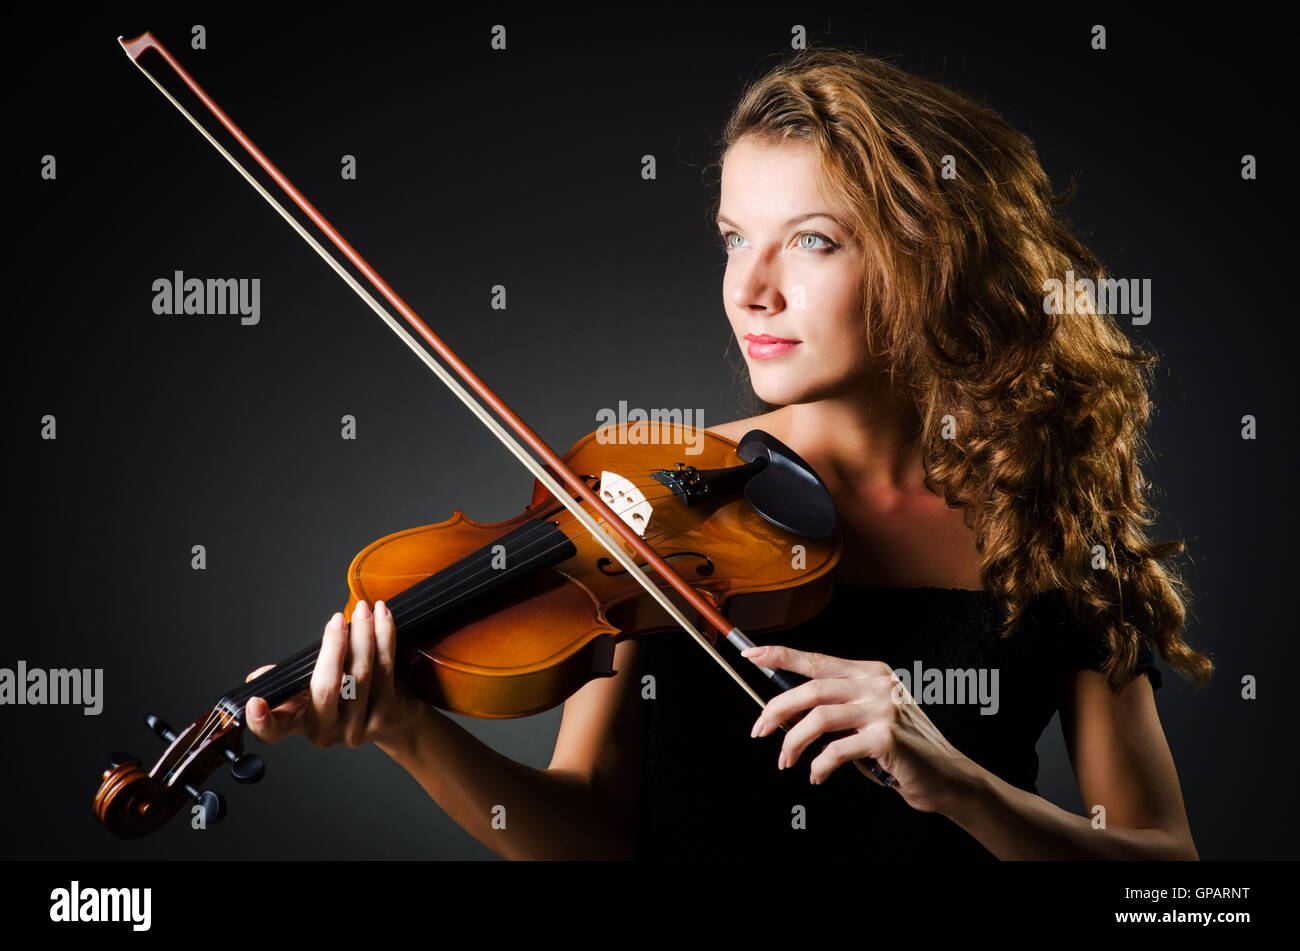 Woman with violin in dark room Banque D'Images